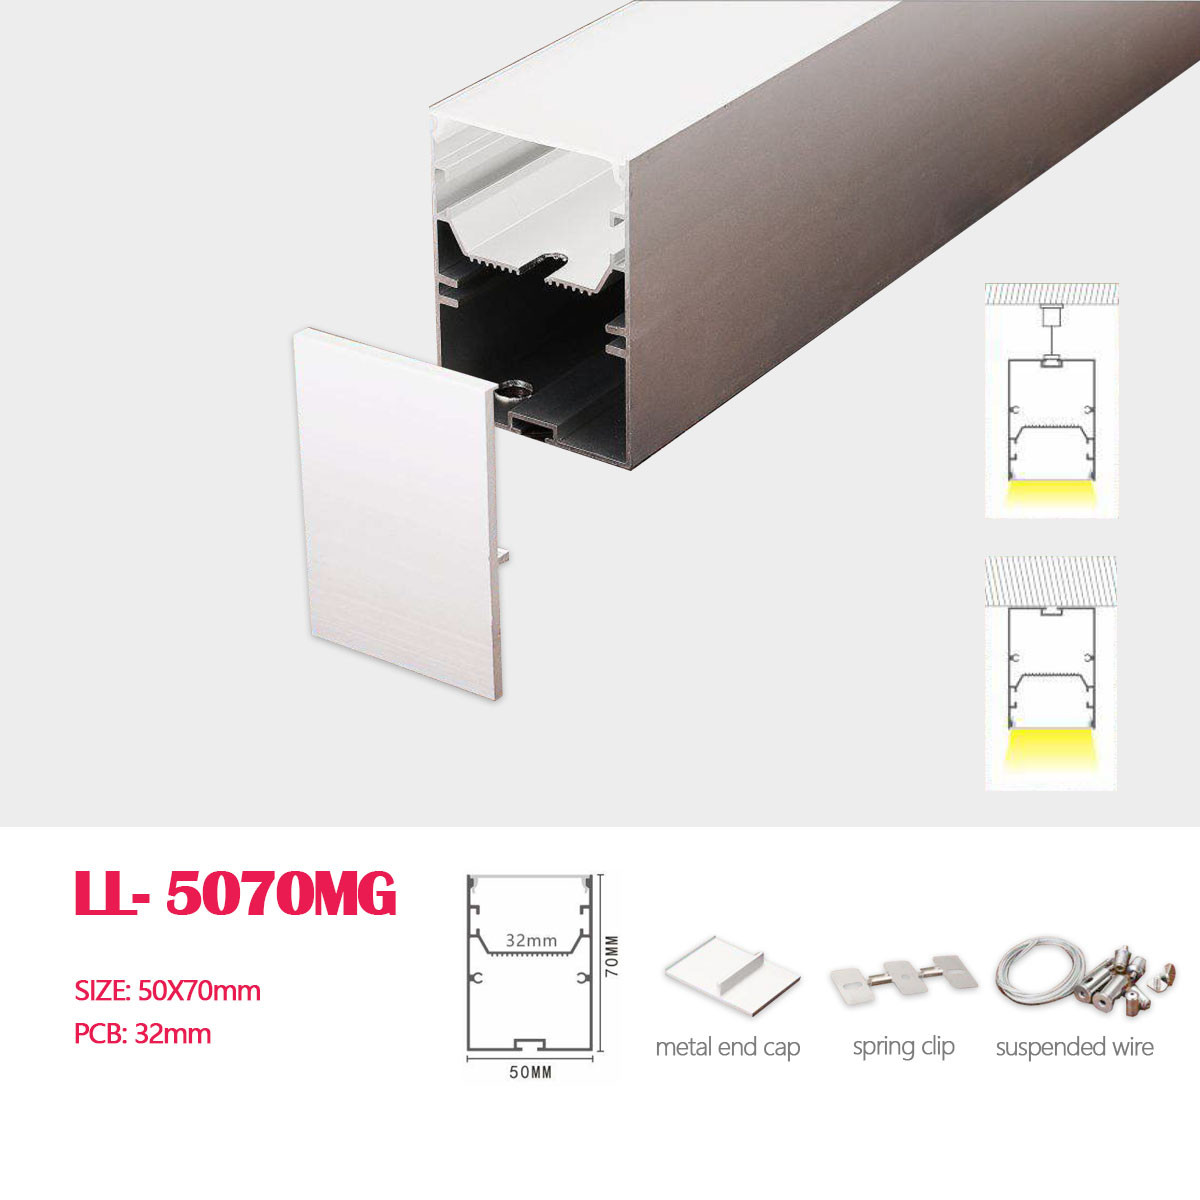 1M (3.28FT) 50MM*70MM Square Double-layer Aluminum Profile with Flat  cover and Matel  Accessories for  Suspended or Recessed LED Strip Lighting  Application